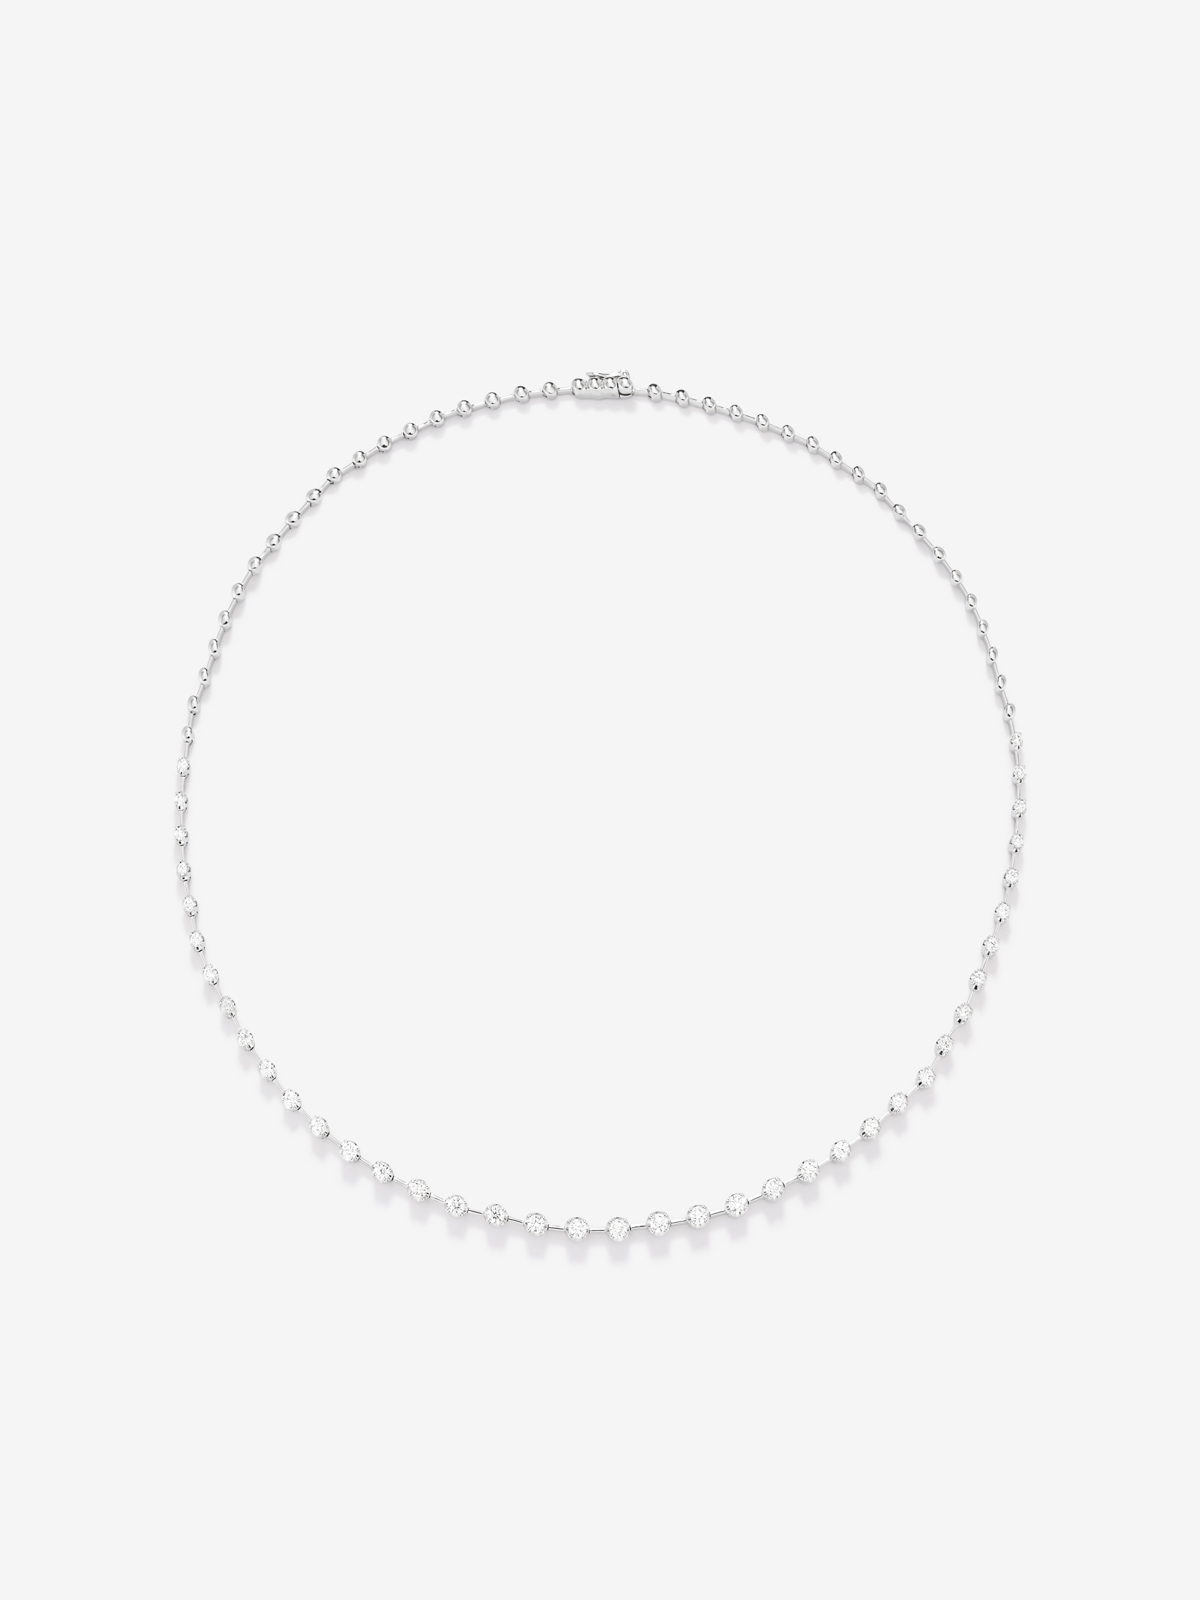 18K white gold necklace with white diamonds in 2.03 cts